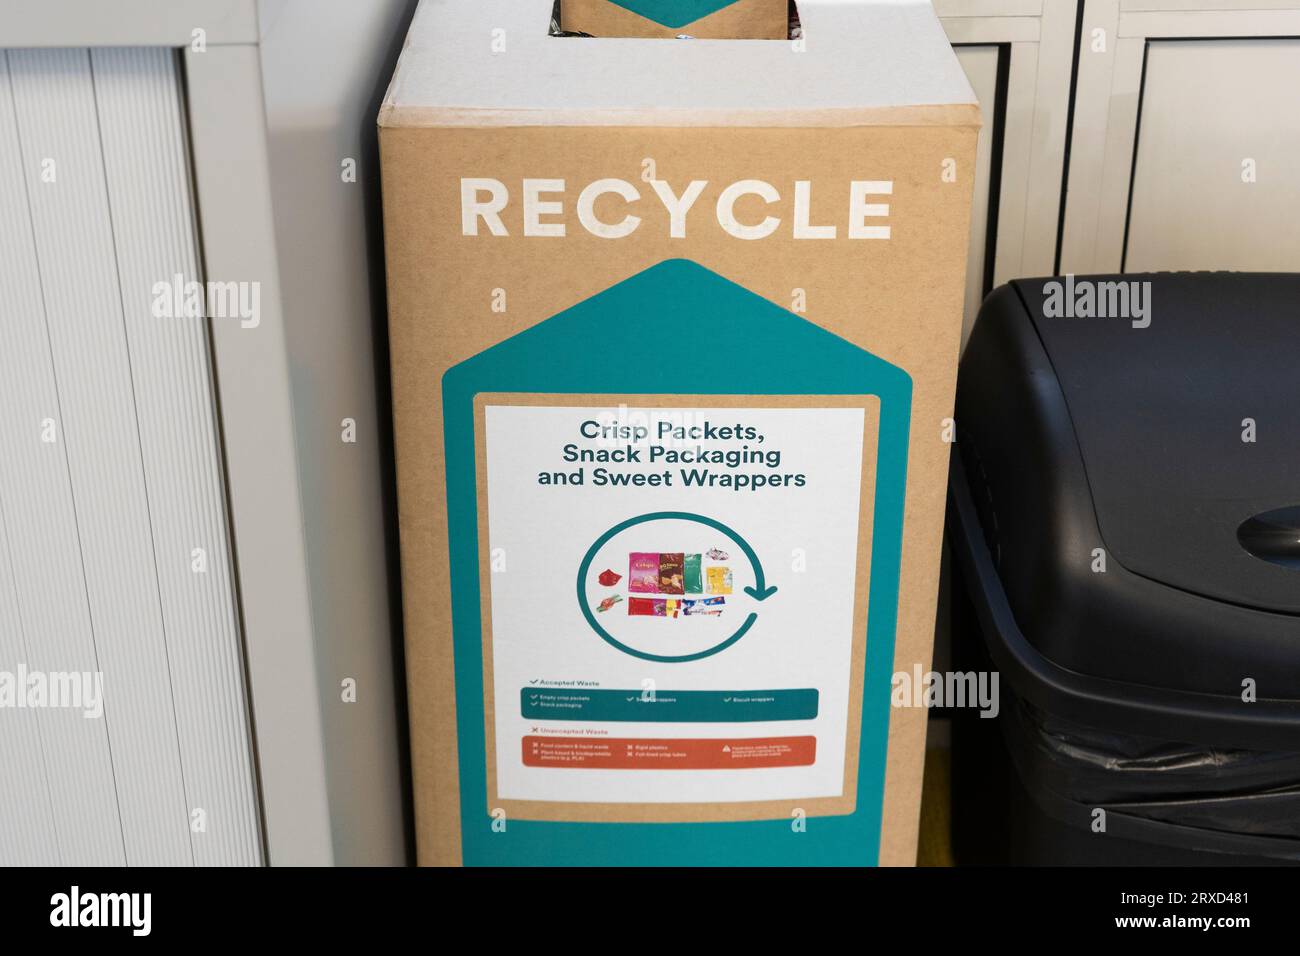 Crisp packet, snack packaging and sweet wrapper recycling box in a UK office. Concept: office recycling, food packaging recycling Stock Photo